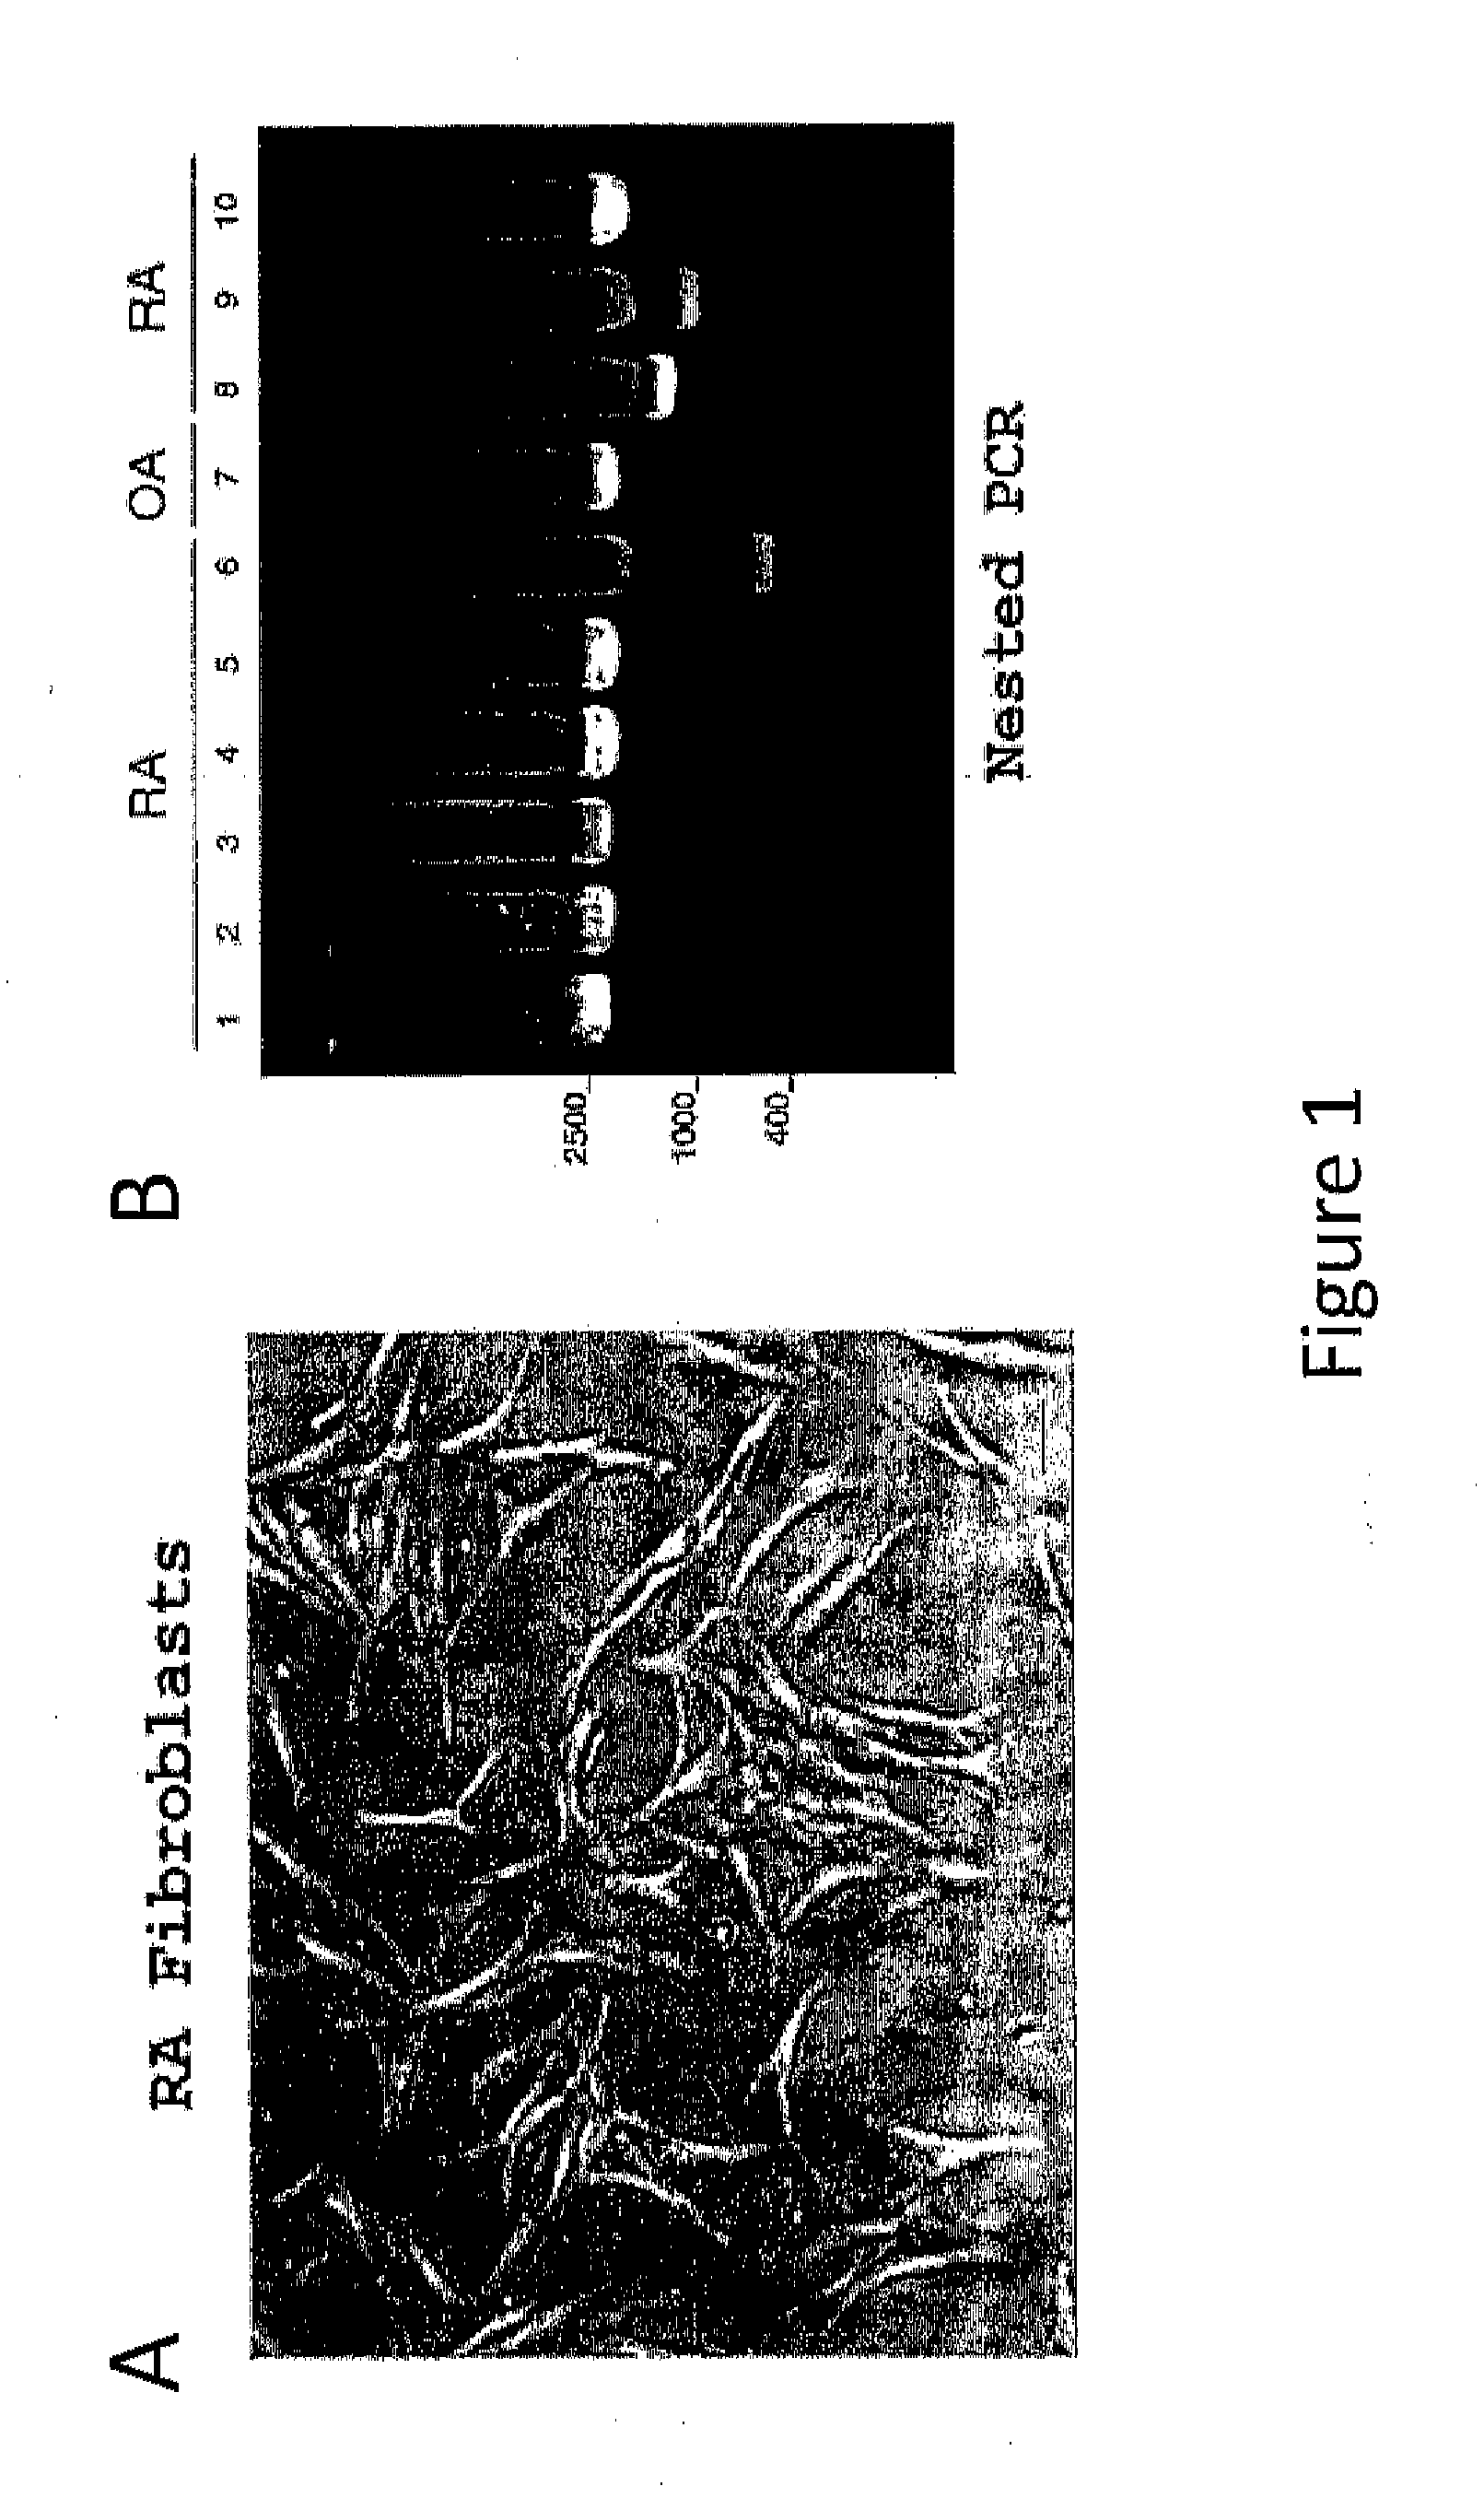 Methods for determining and inhibiting rheumatoid arthritis associated with the braf oncogene in a subject